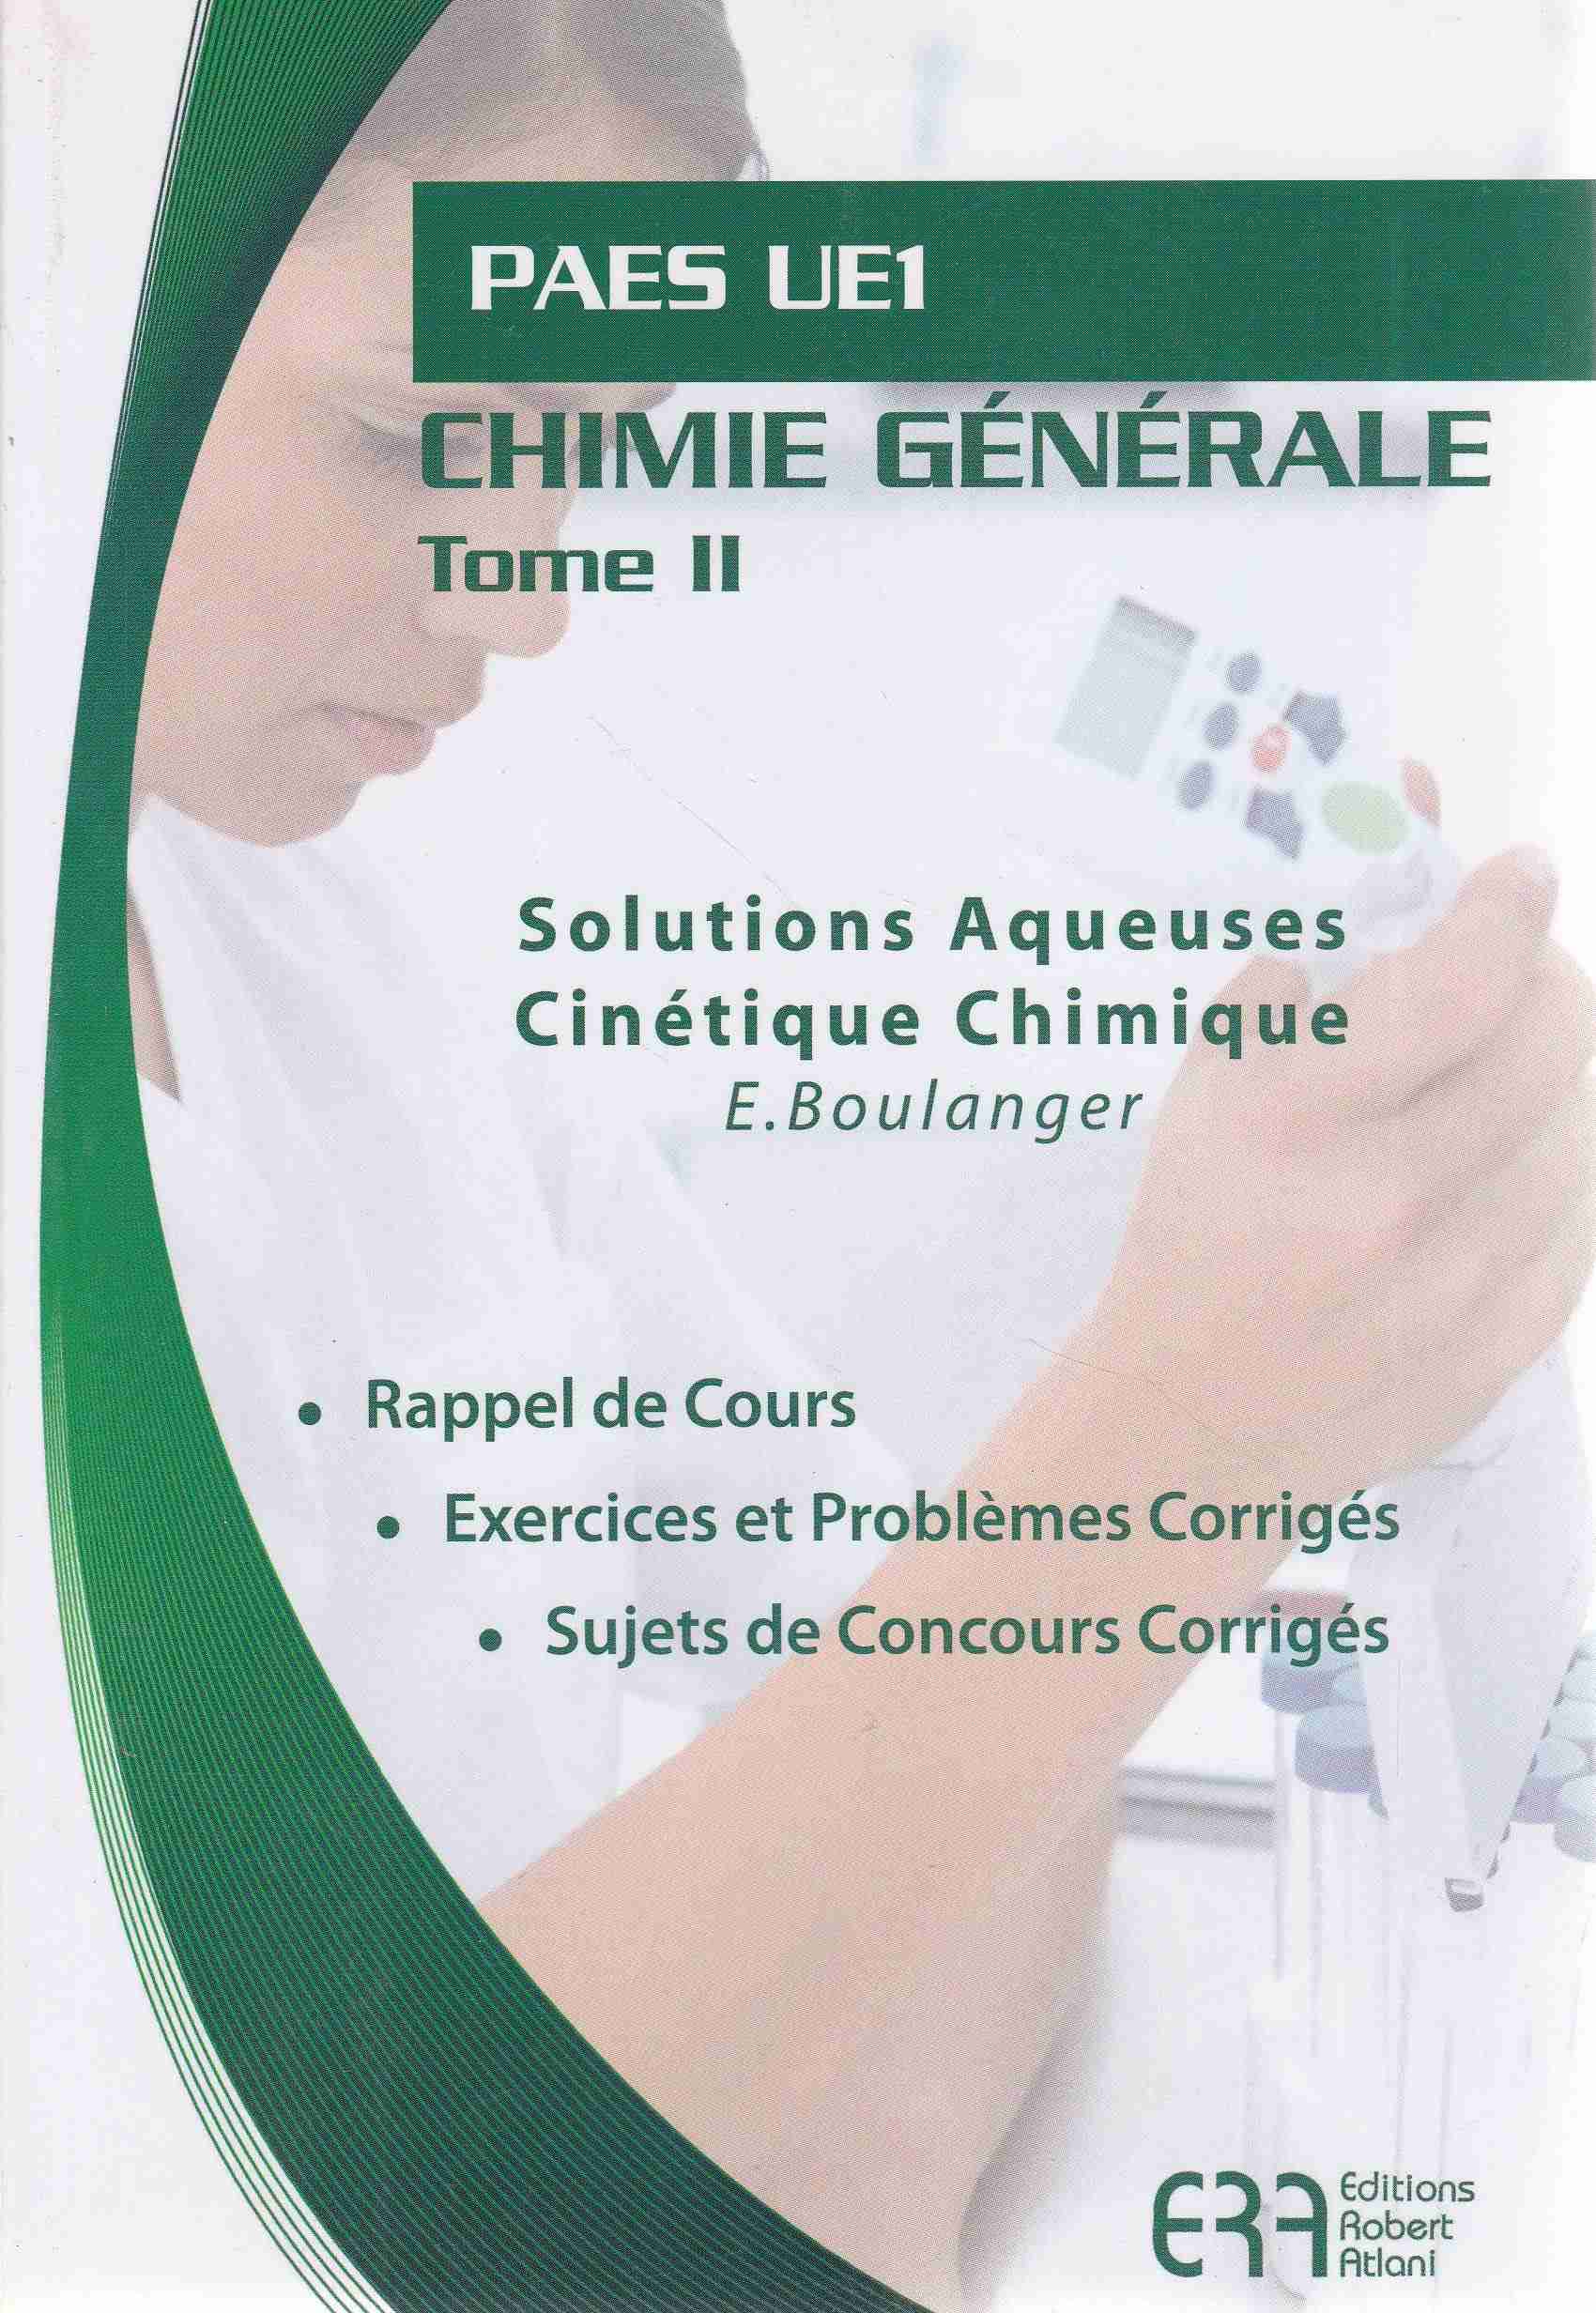 paes ue1 chimie generale tome 2